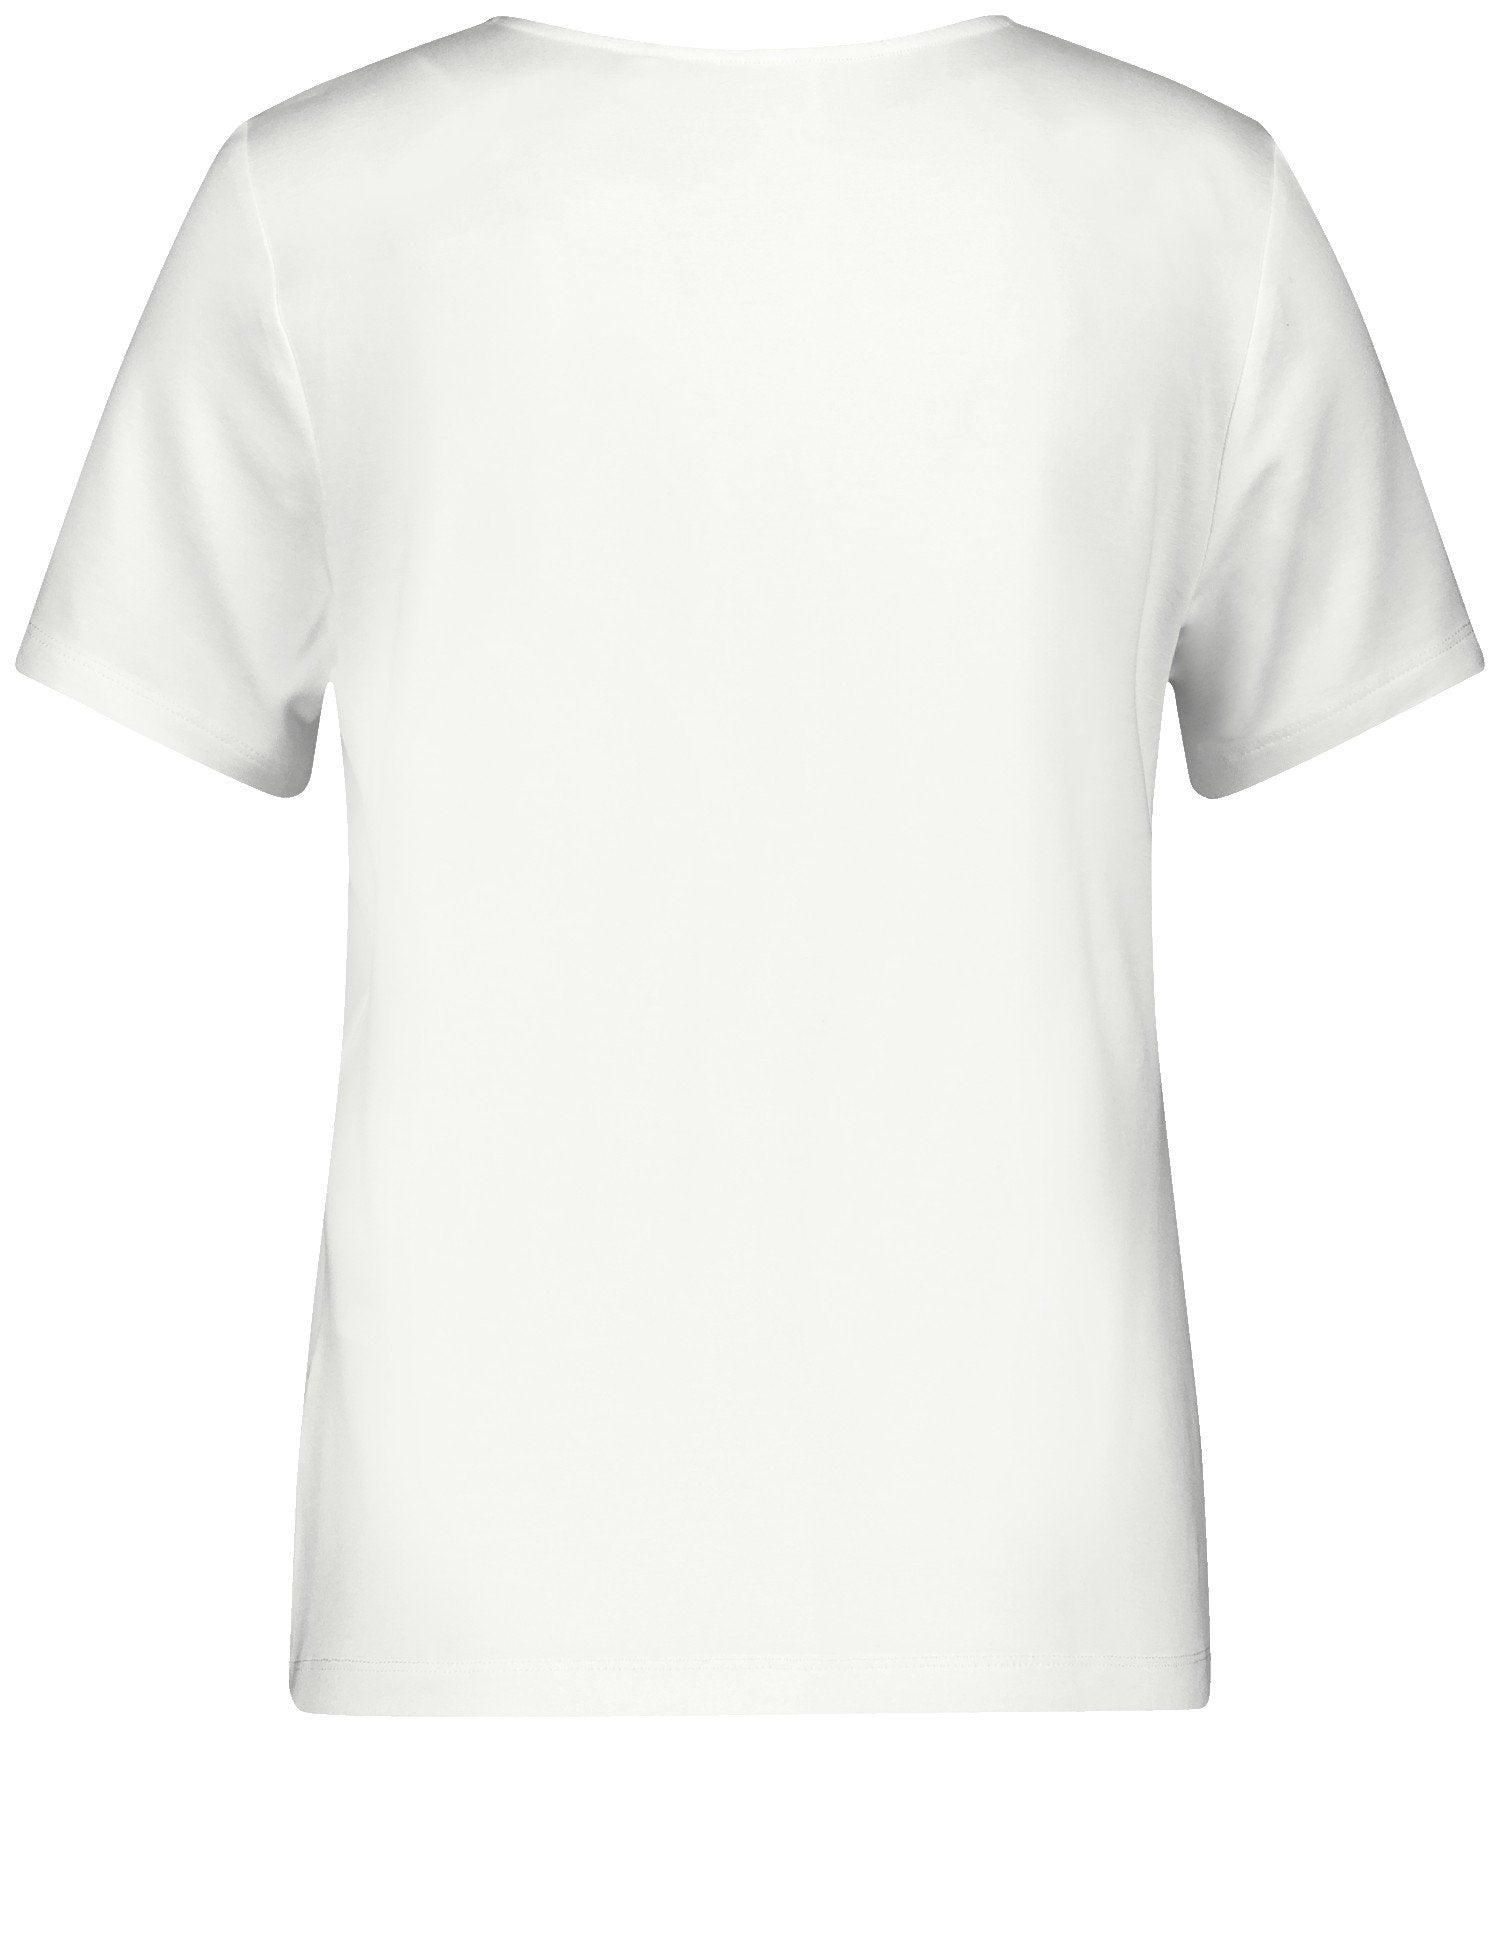 T-Shirt With Fabric Panelling_270084-44086_99700_08